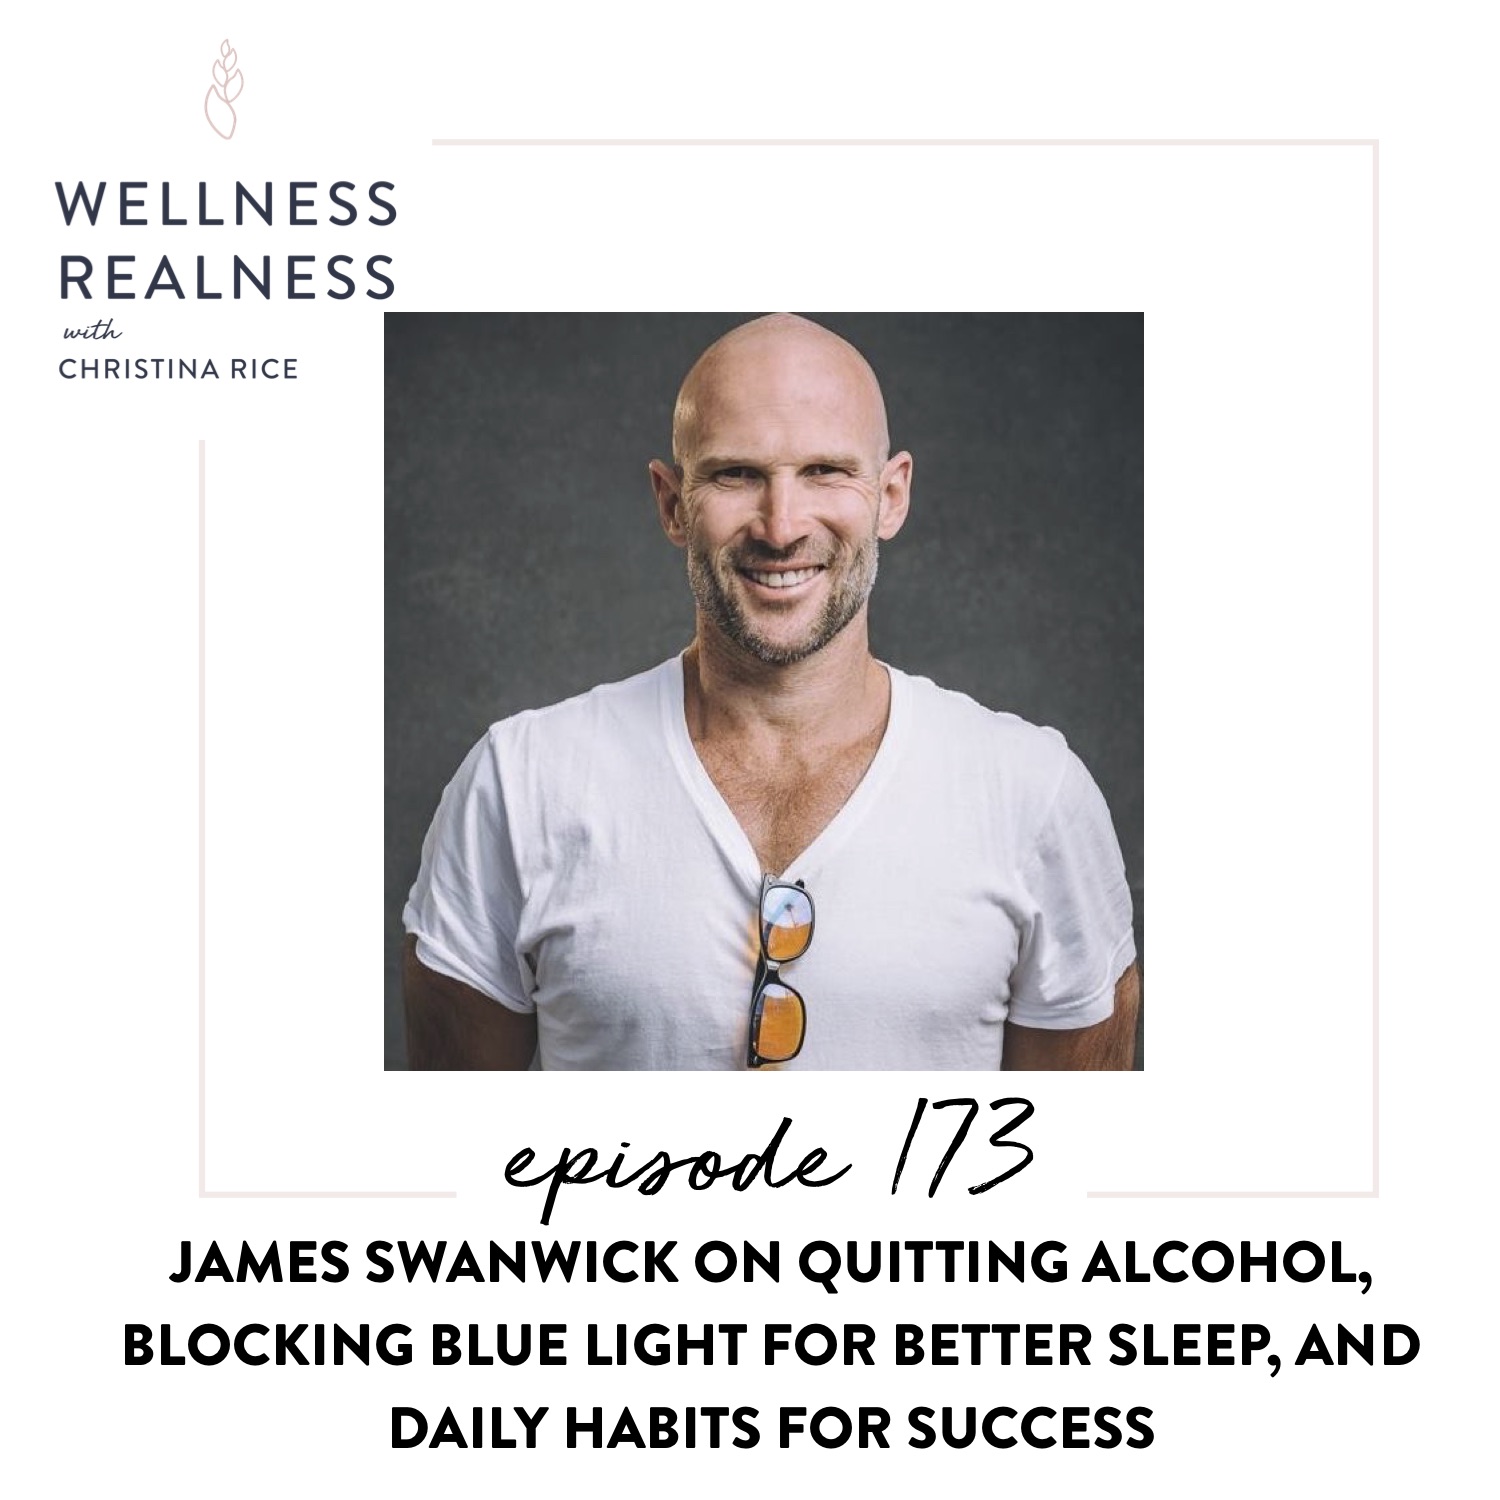 173: James Swanwick on Quitting Alcohol, Blocking Blue Light for Better Sleep, and Daily Habits for Success